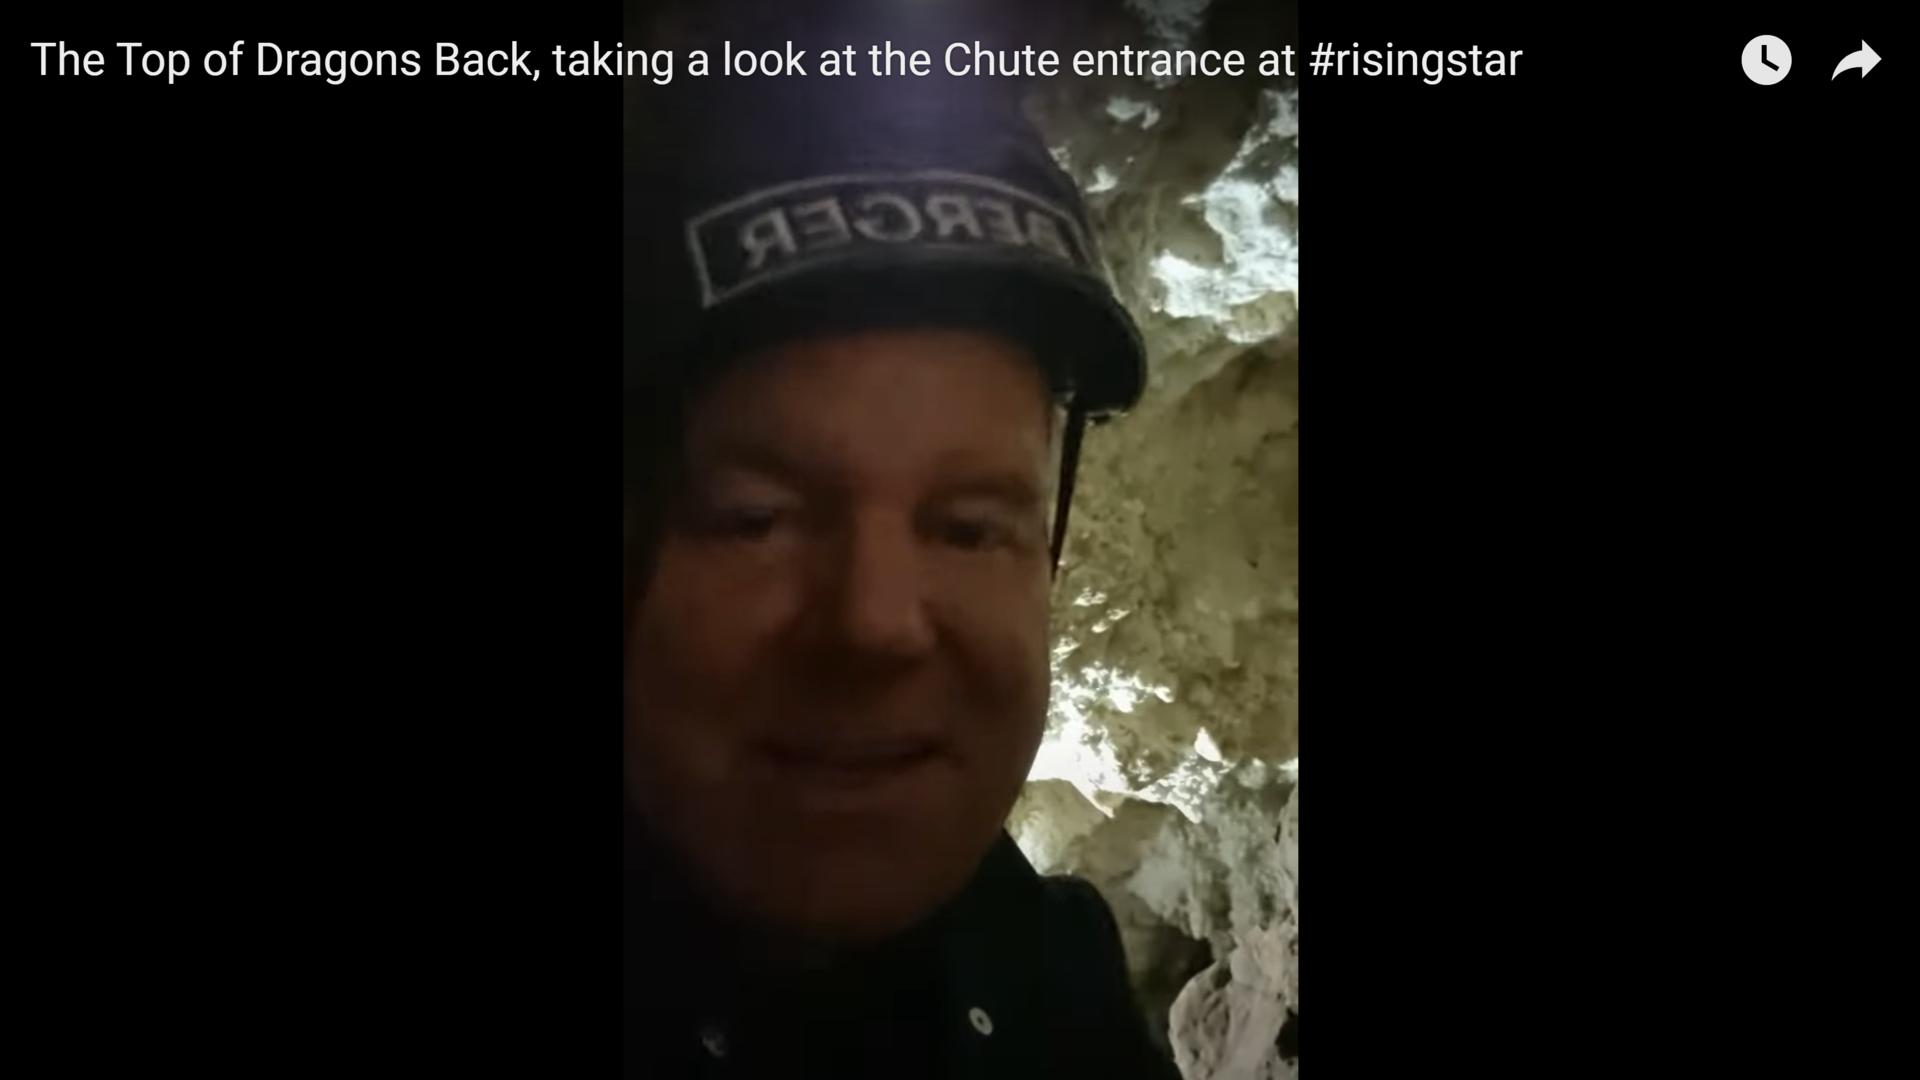 5.2.2 Live from the Rising Star Cave. 2- Dragon’s Back looking into the Chute